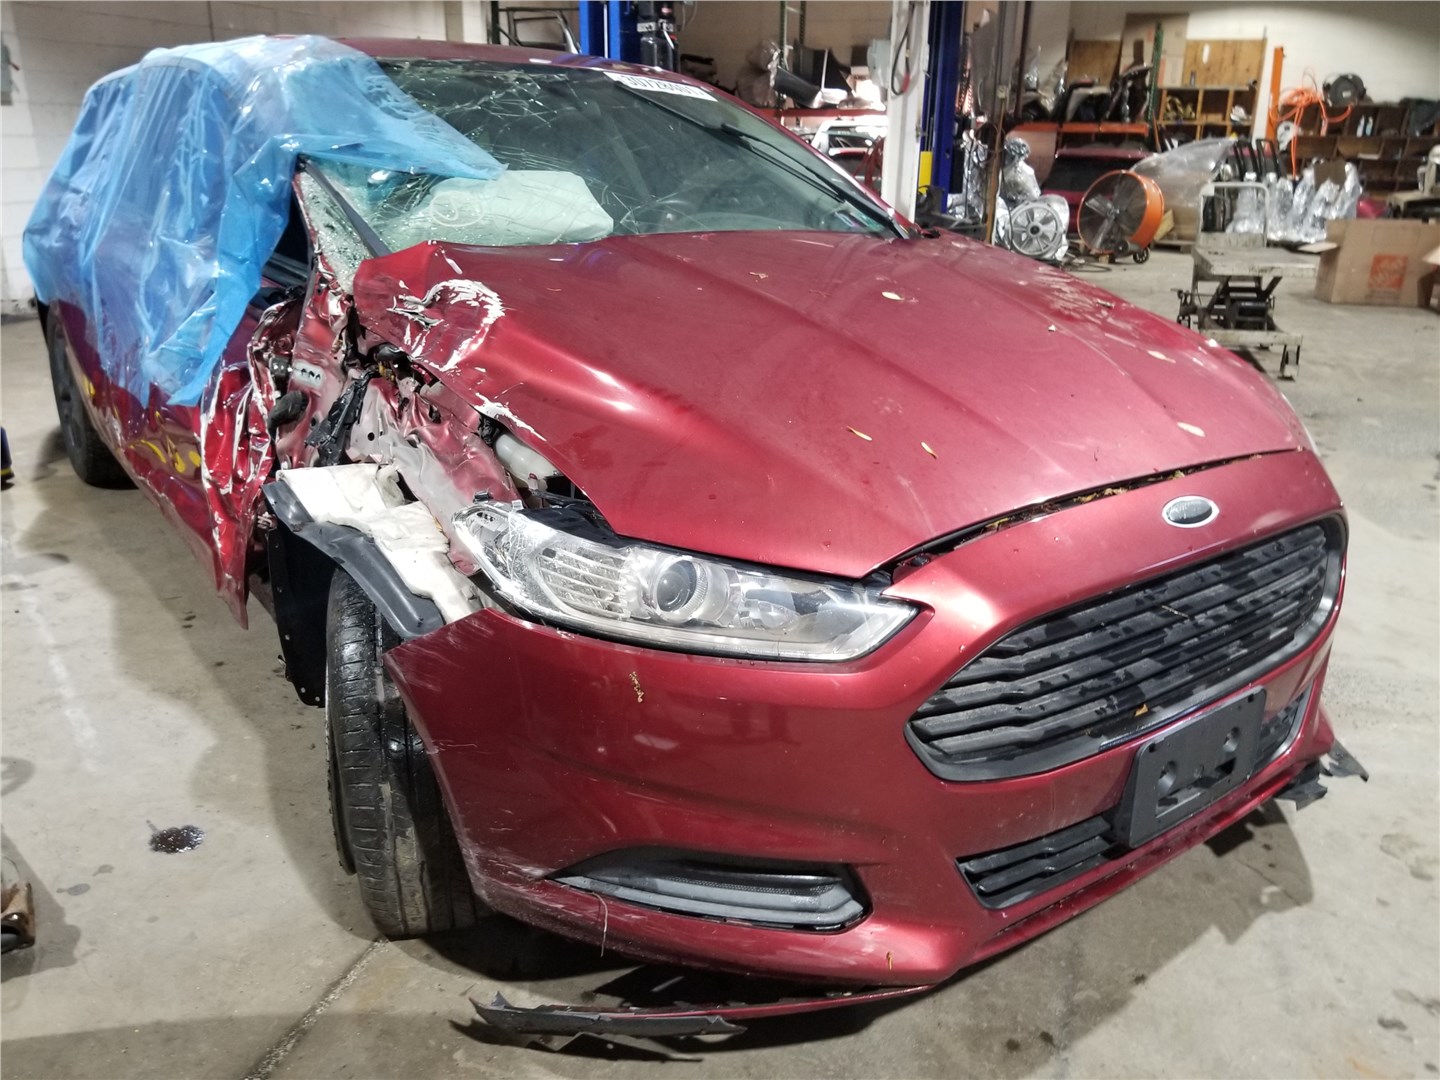 BS110555      Ford Fusion 2012-2016 USA  2014       1510  Z18172274 - iZAP24